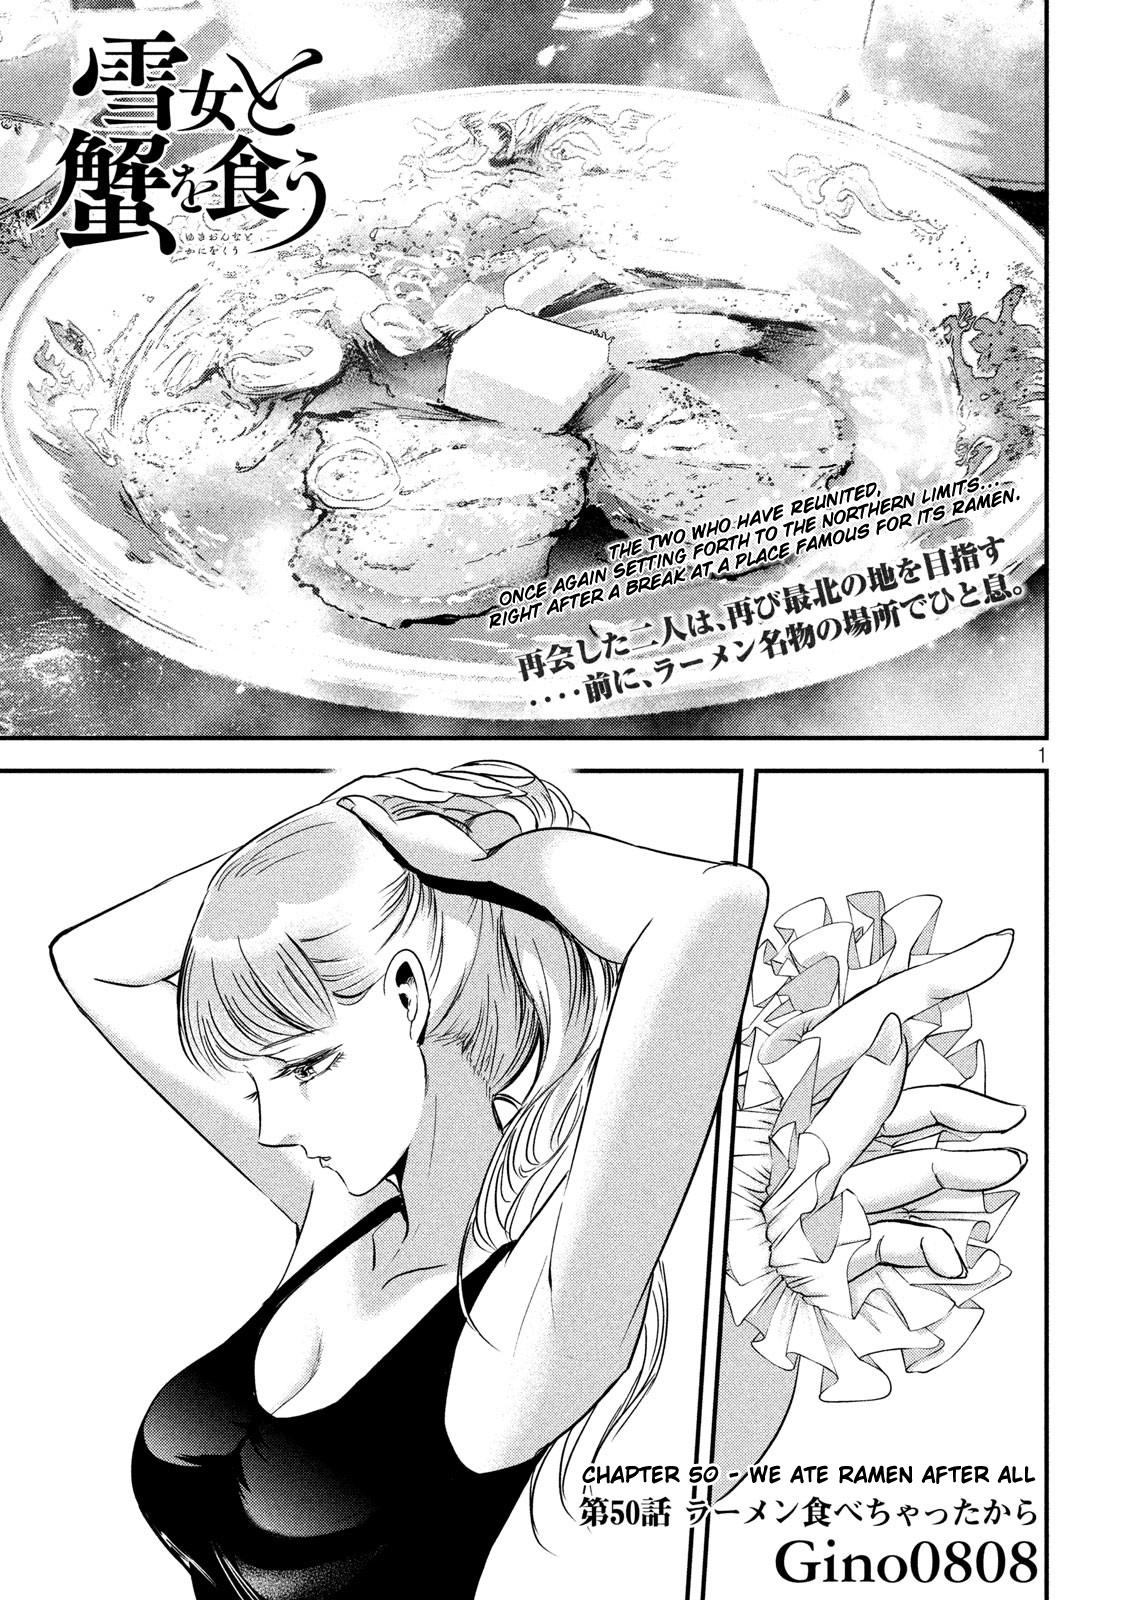 Eating Crab With A Yukionna - Page 1